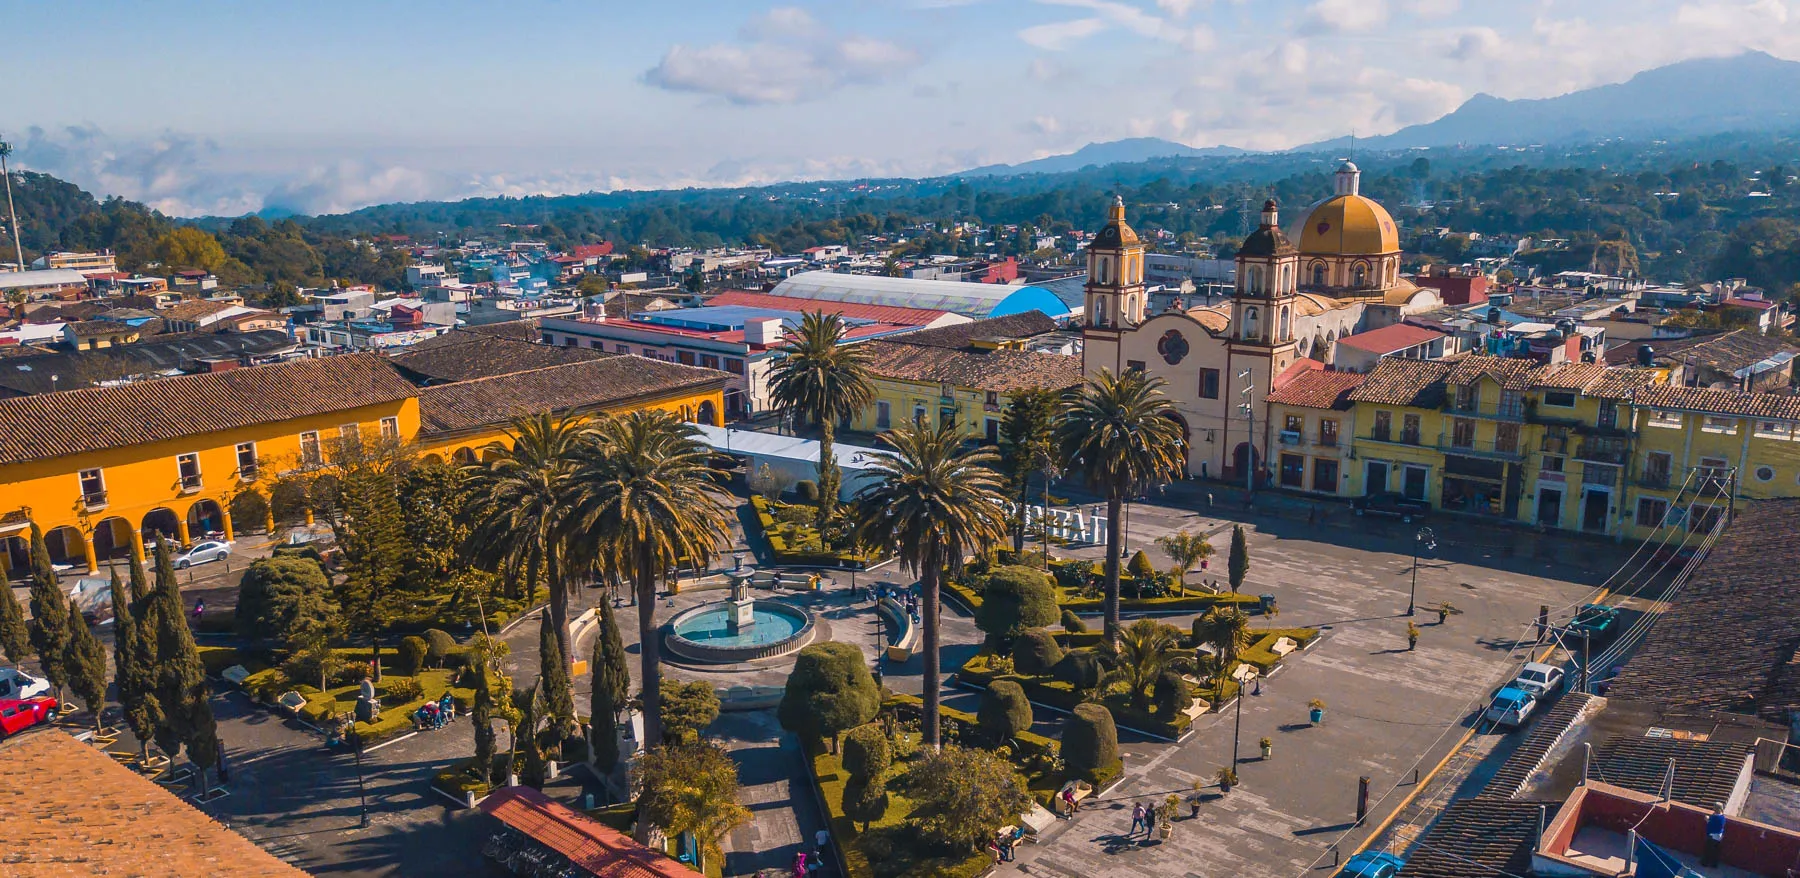 Tlatlauquitepec Puebla Magical Town | Where to Go and What to Do